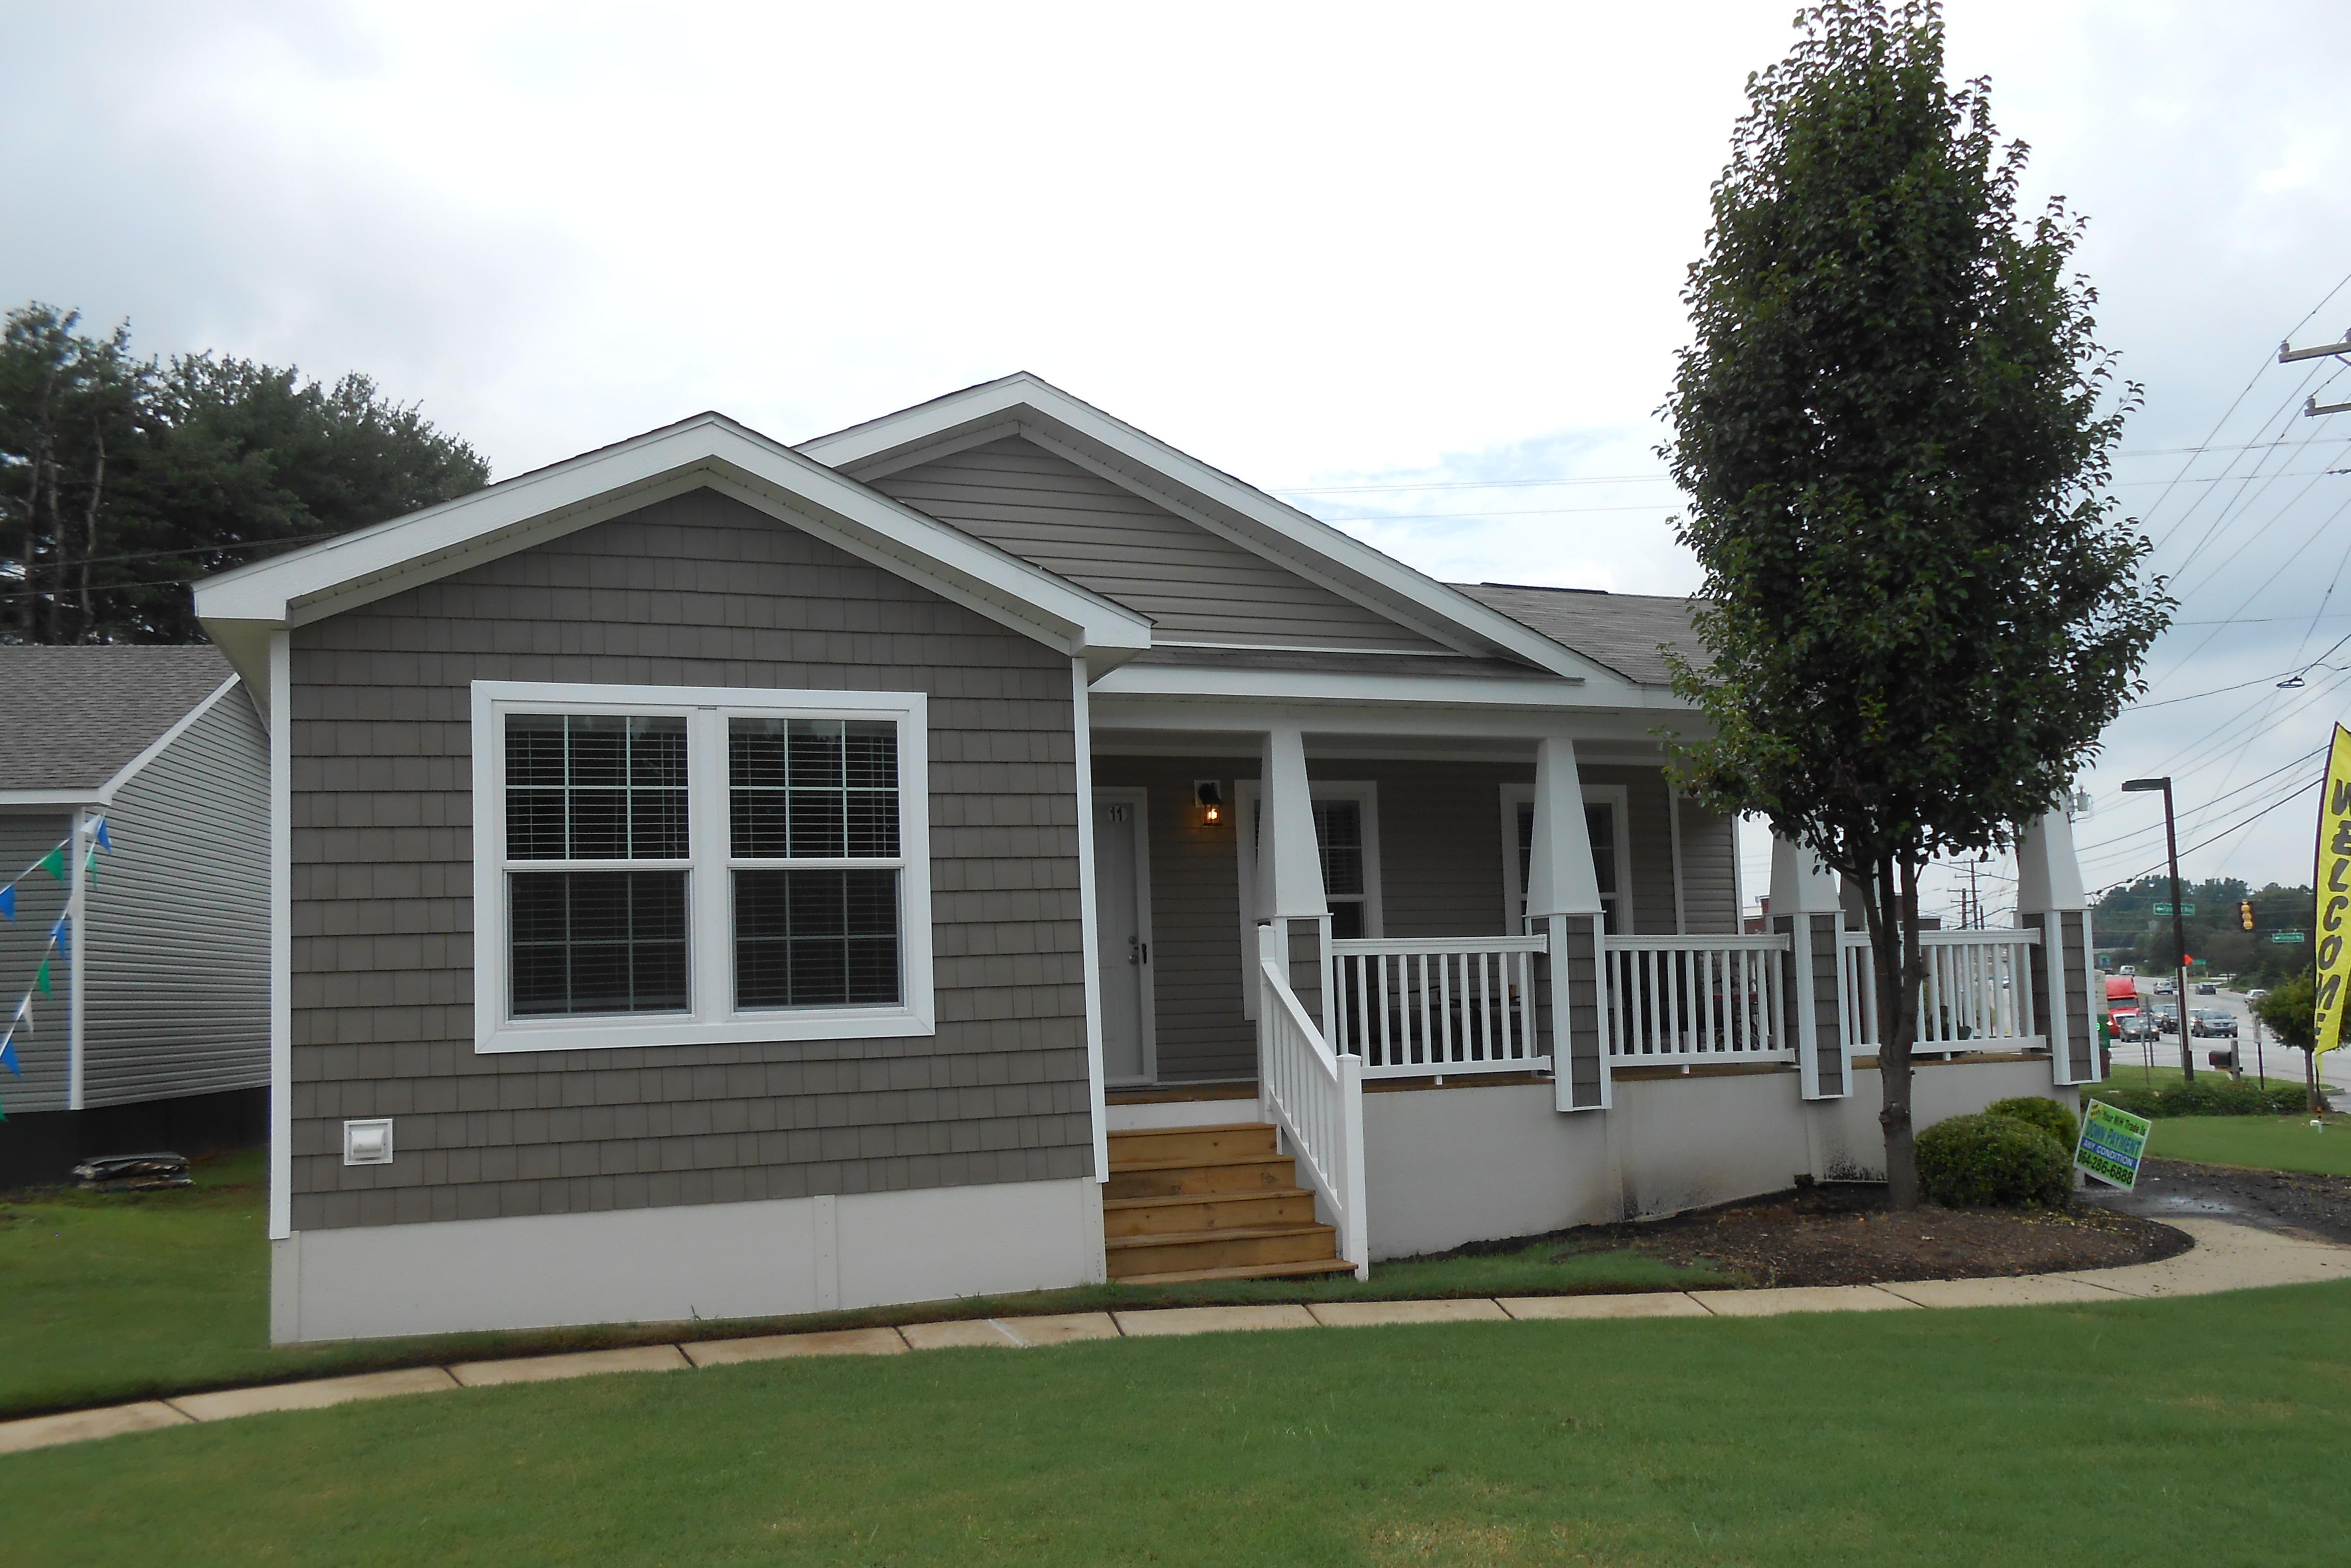 Awesome Used Mobile Homes For Sale In Greenville Sc Pictures - Kelsey